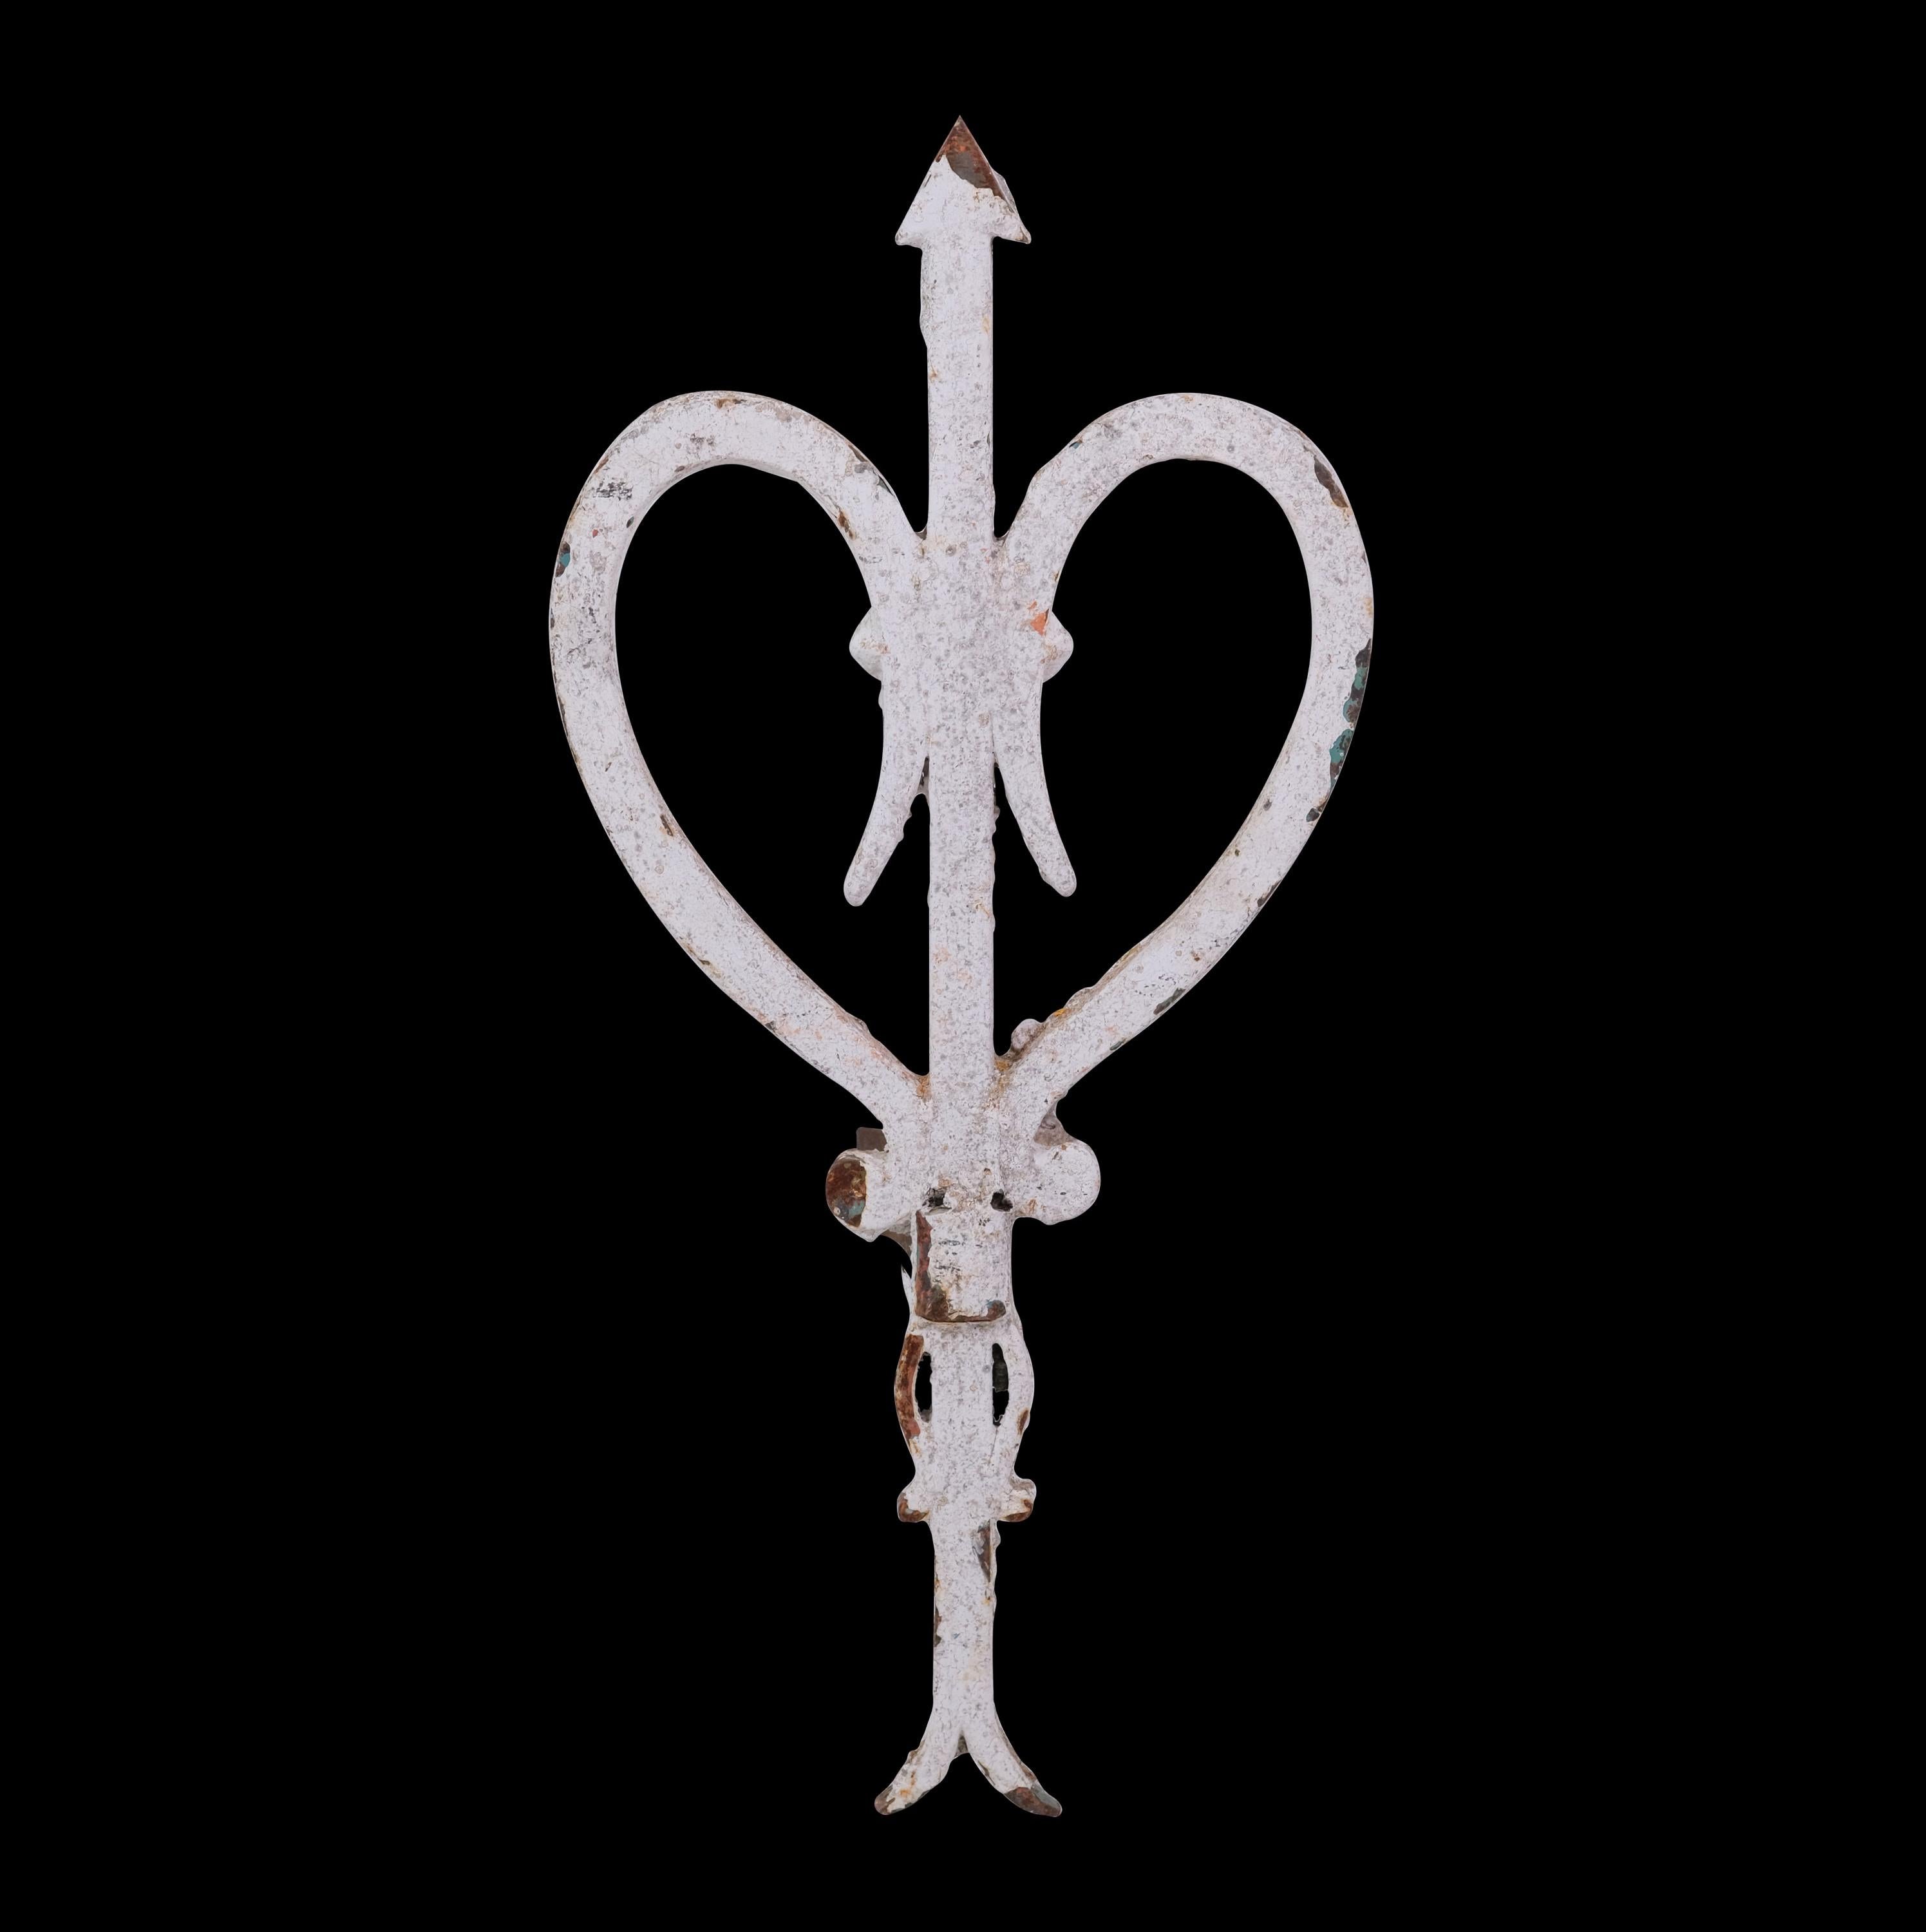 From Europe, wrought iron finial with a heart and arrow design. Original white paint with minor rusting. This can be seen at our 400 Gilligan St location in Scranton, PA.